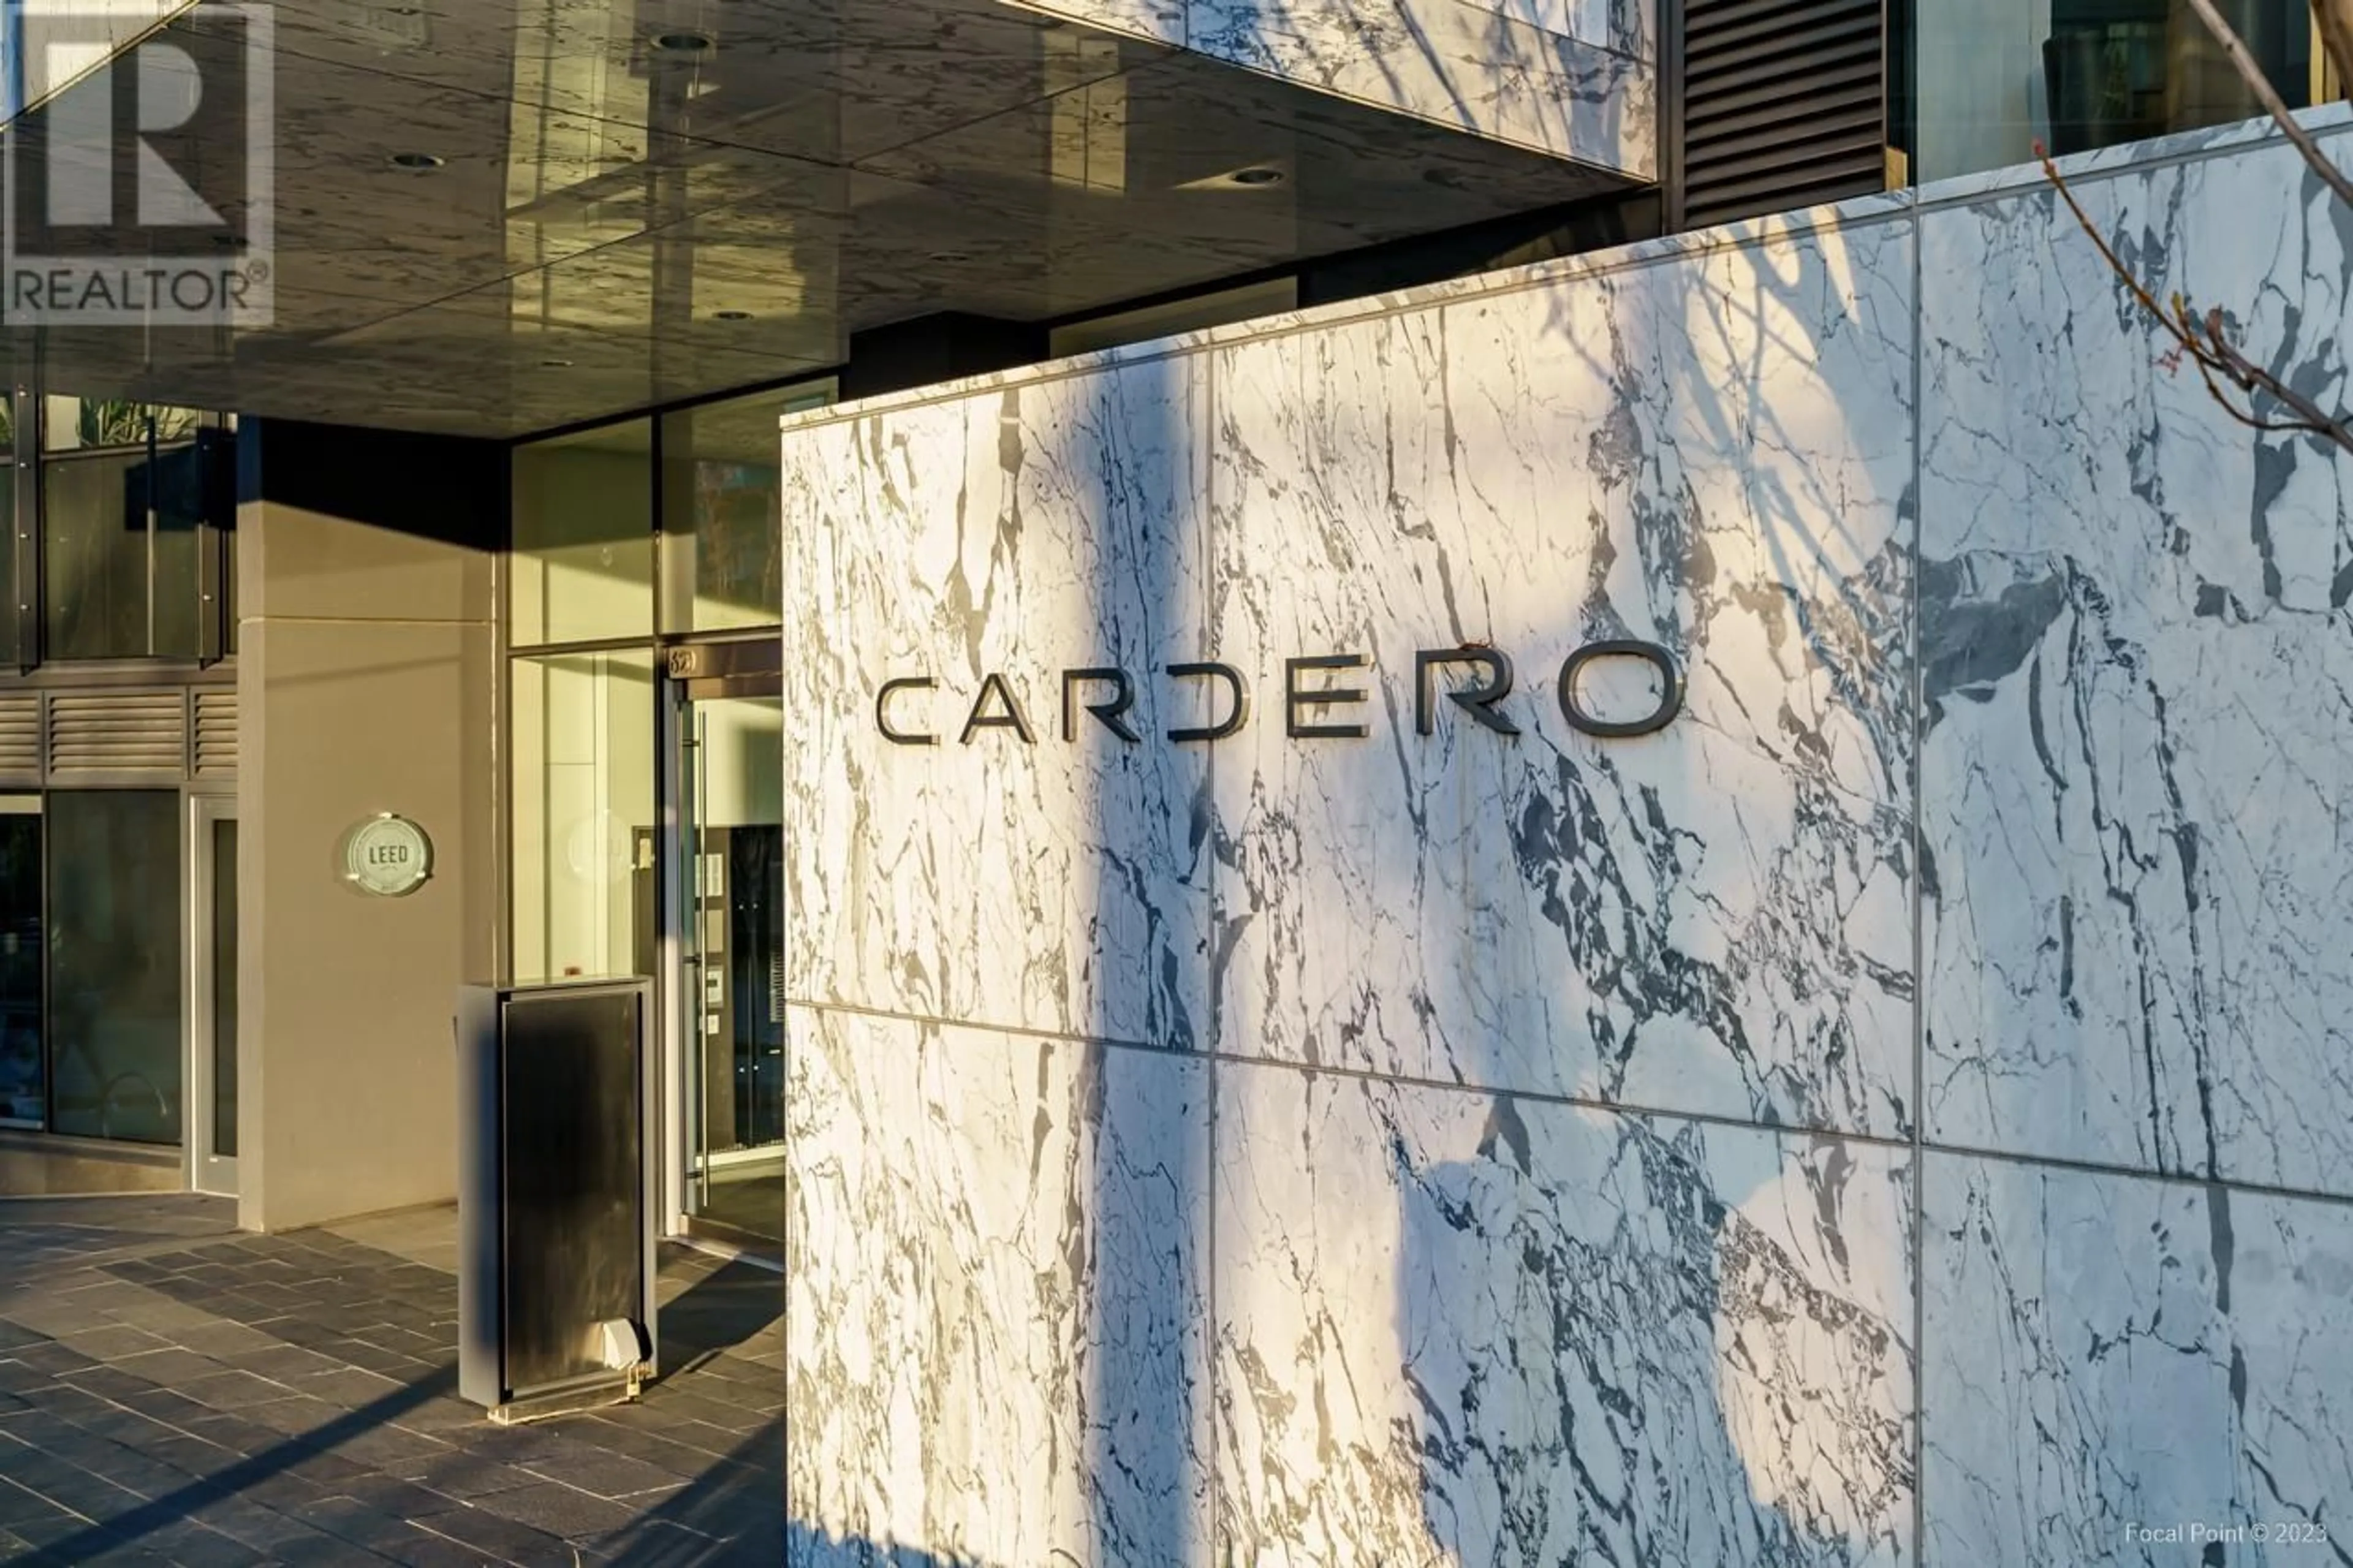 Indoor lobby for 1401 620 CARDERO STREET, Vancouver British Columbia V6G0C7